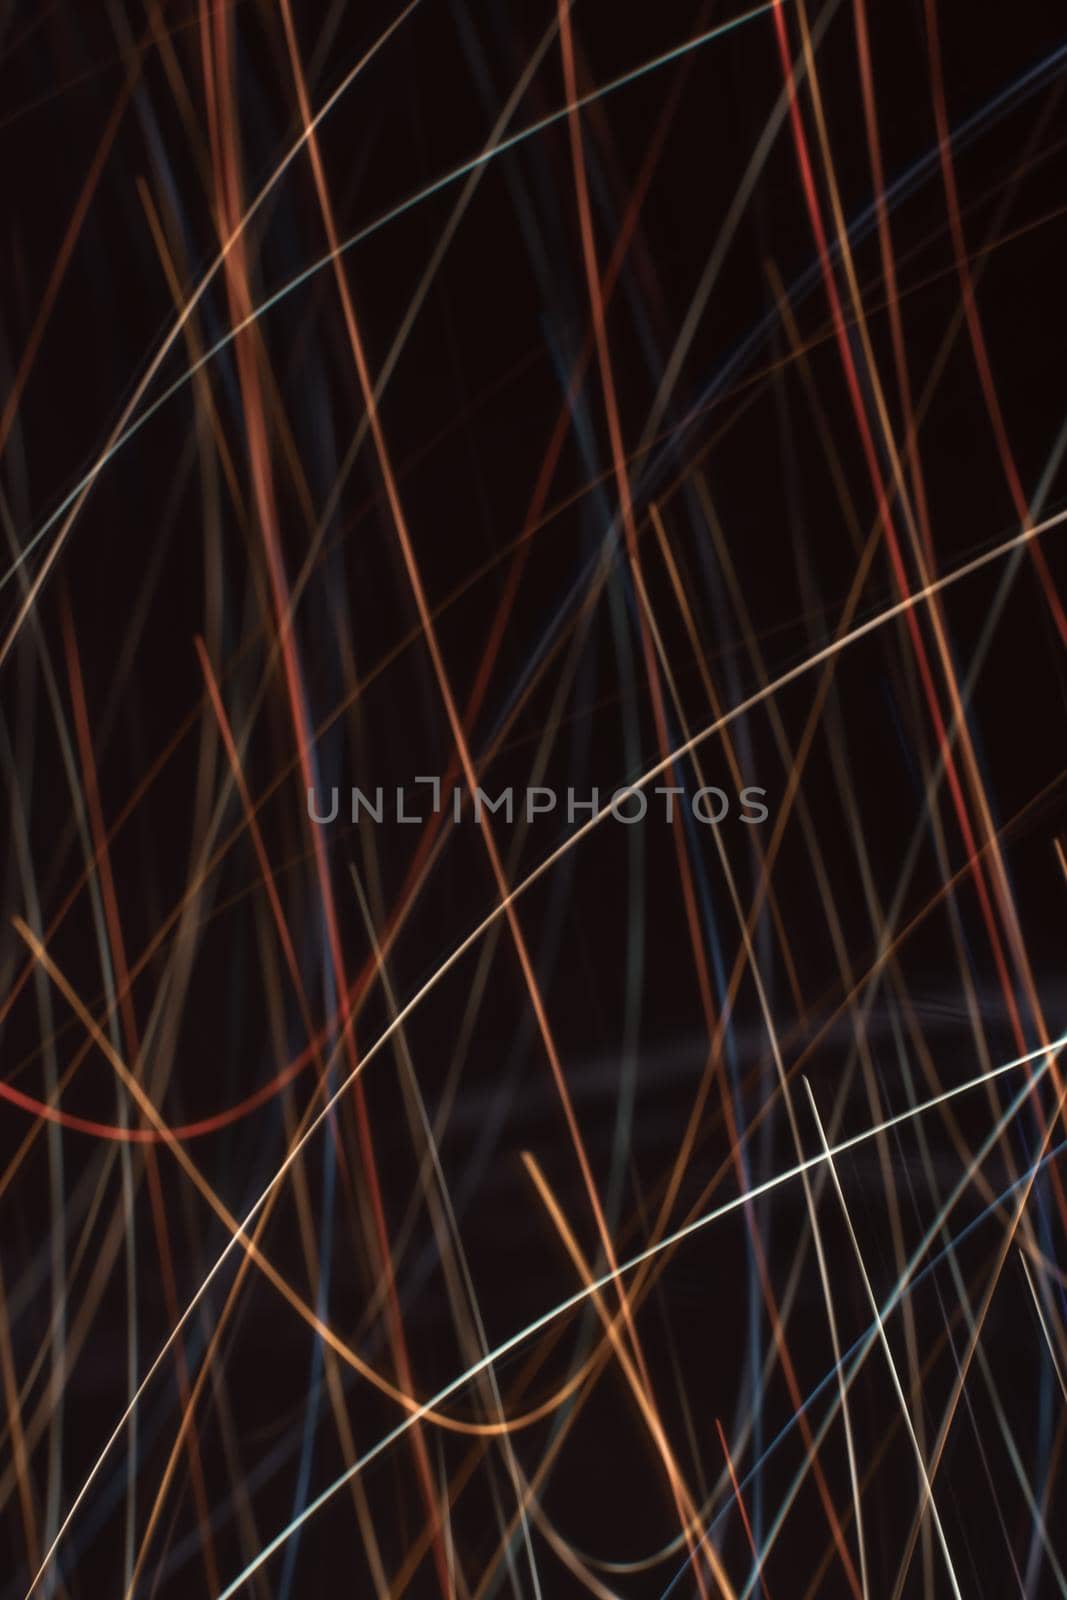 Blurred light from festive garlands. Backdrop. Vertical background with multicolored lines.